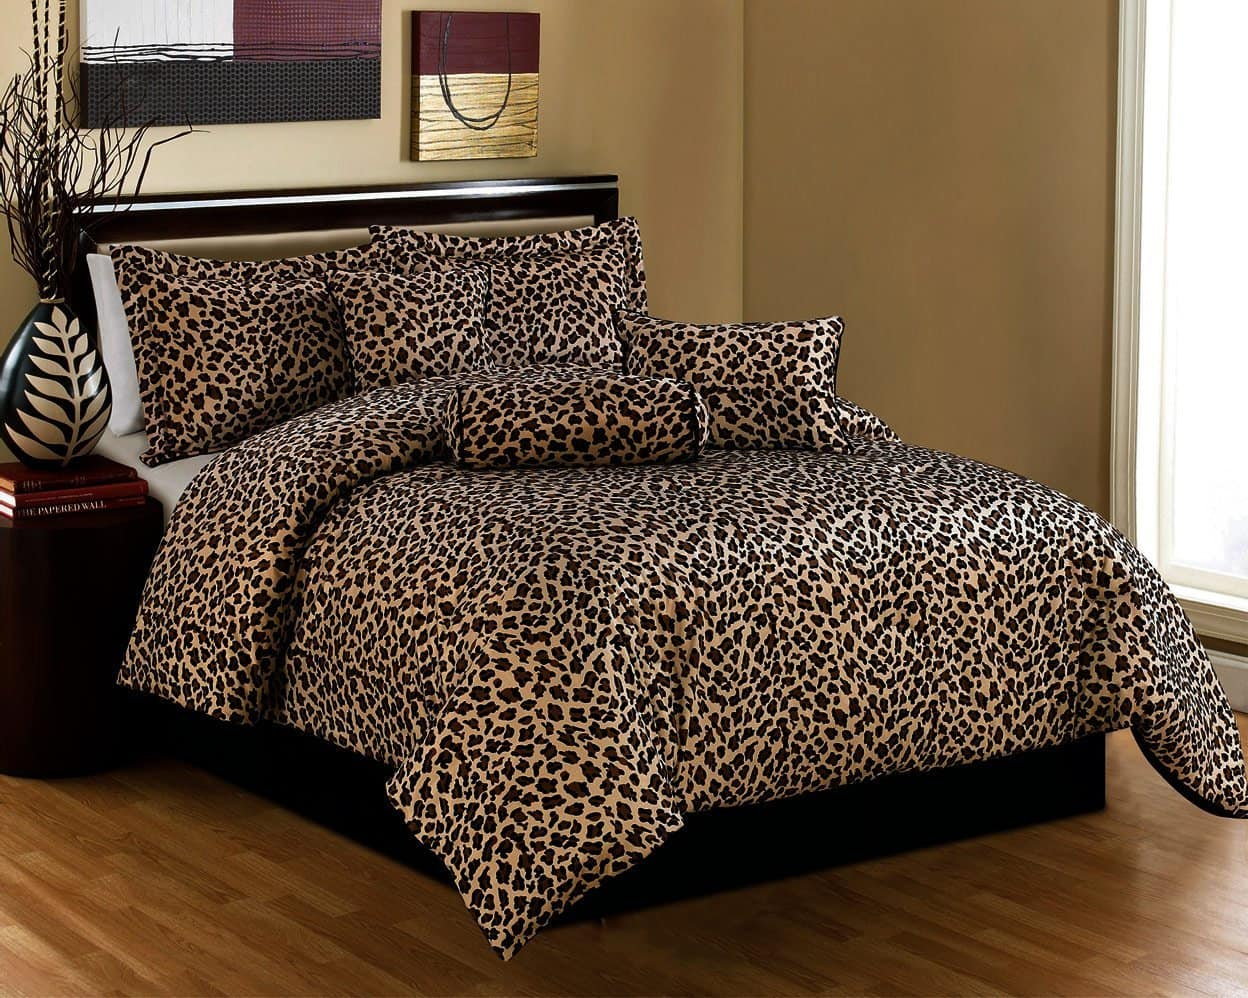 Best Leopard Print Comforter Sets 2019 Reviews Buyers Guide in dimensions 1248 X 998